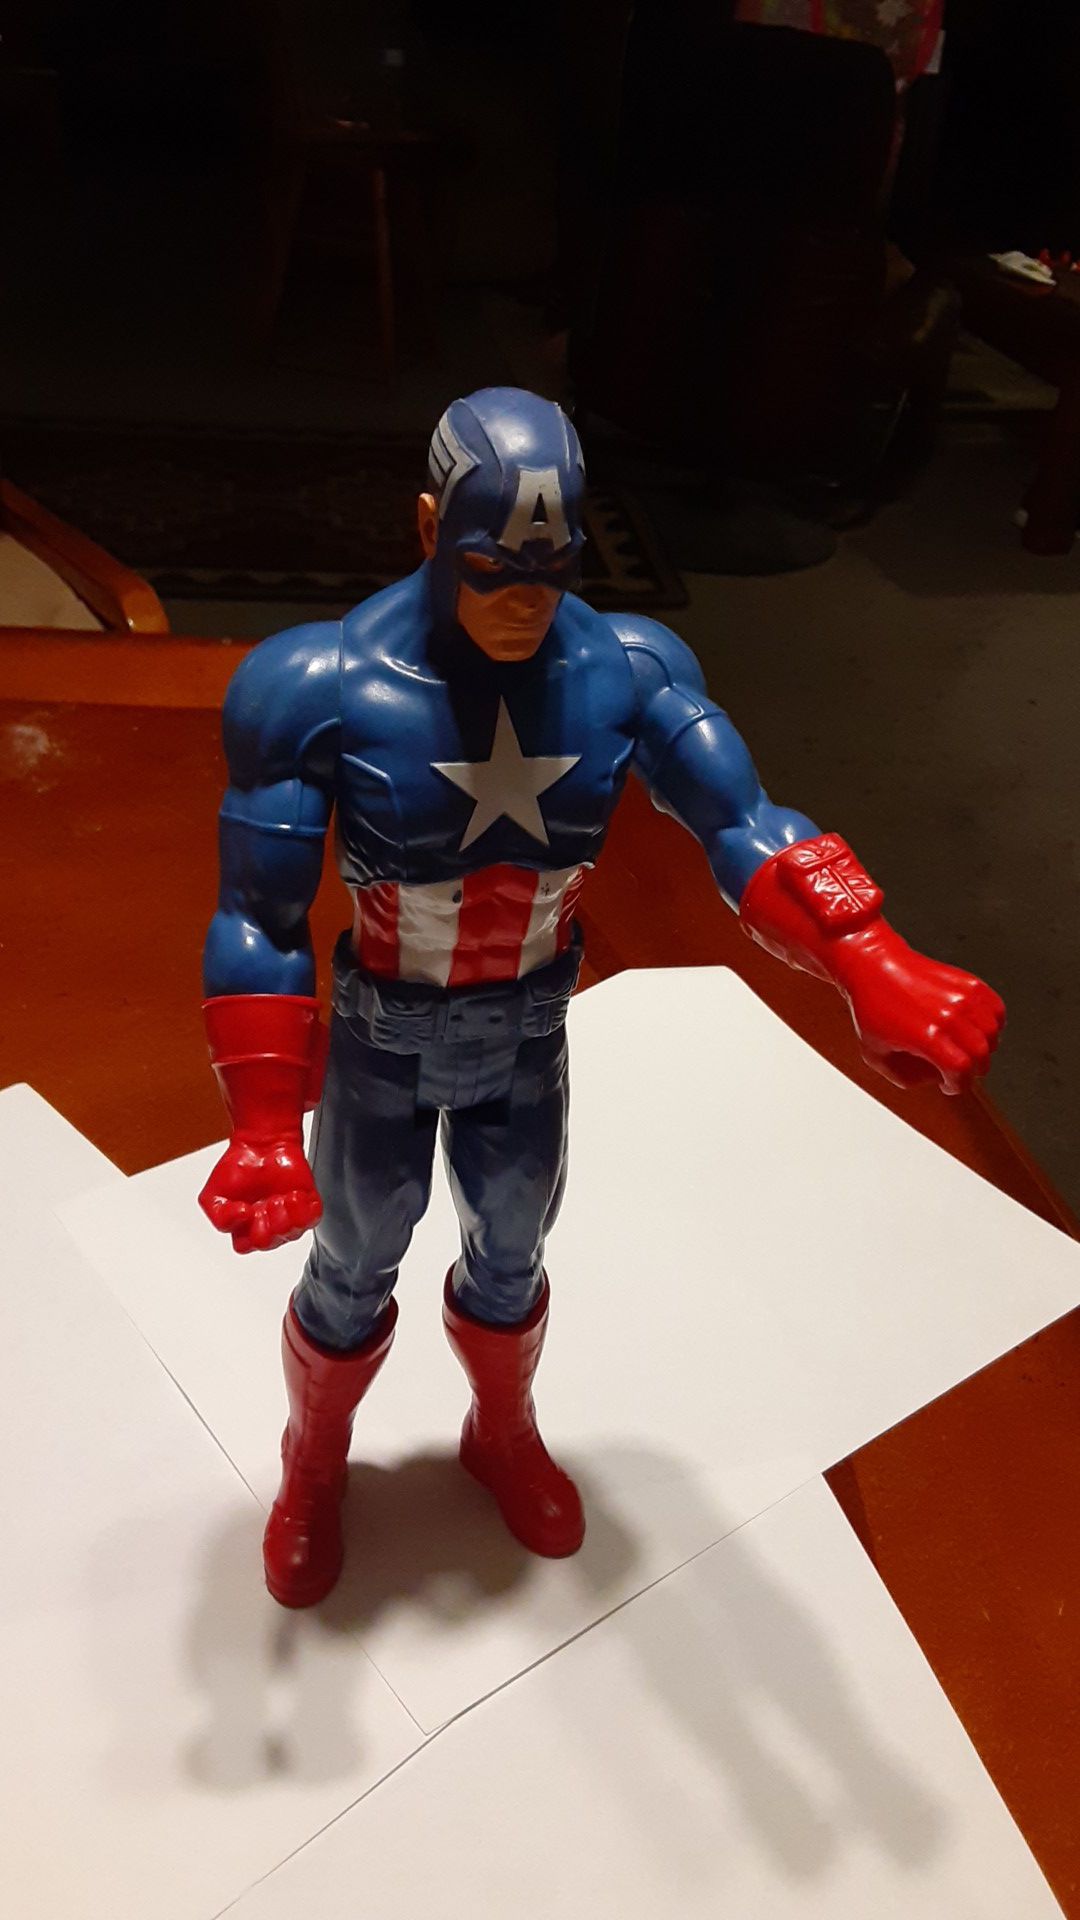 @ CAPTAIN AMERICA TOY. PICK UP ONLY